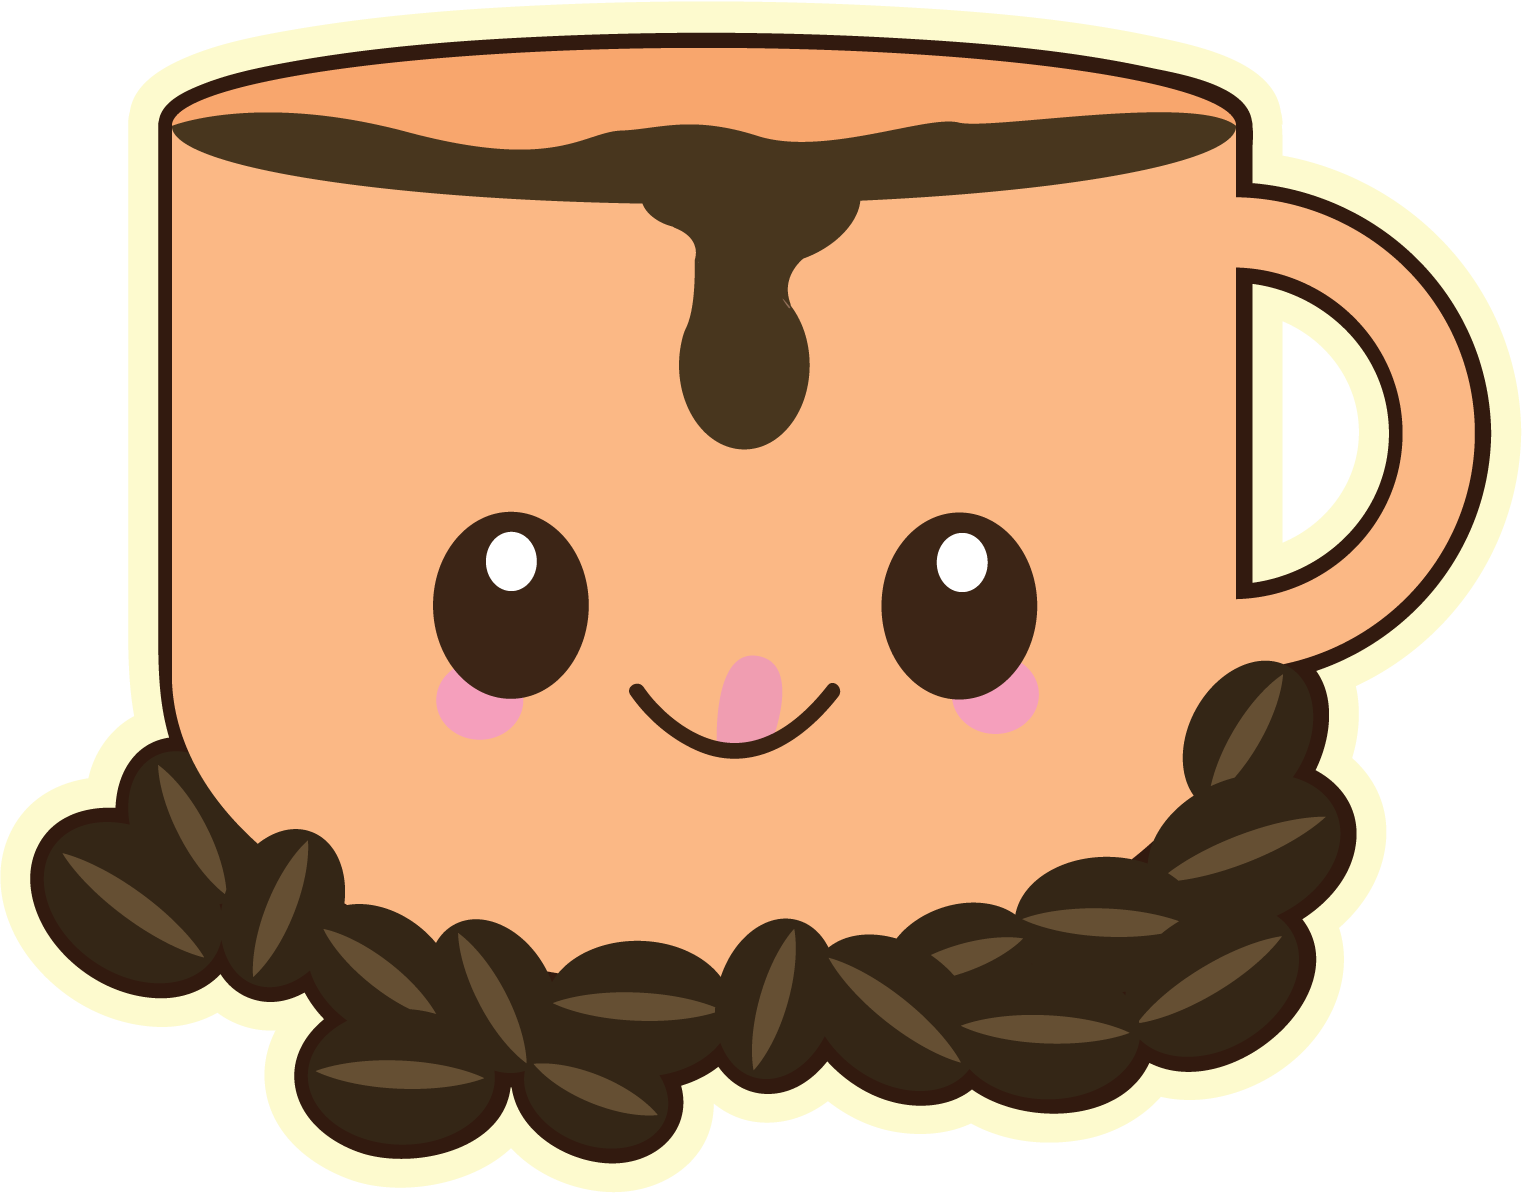 Smiling Coffee Cup Cartoon.png PNG